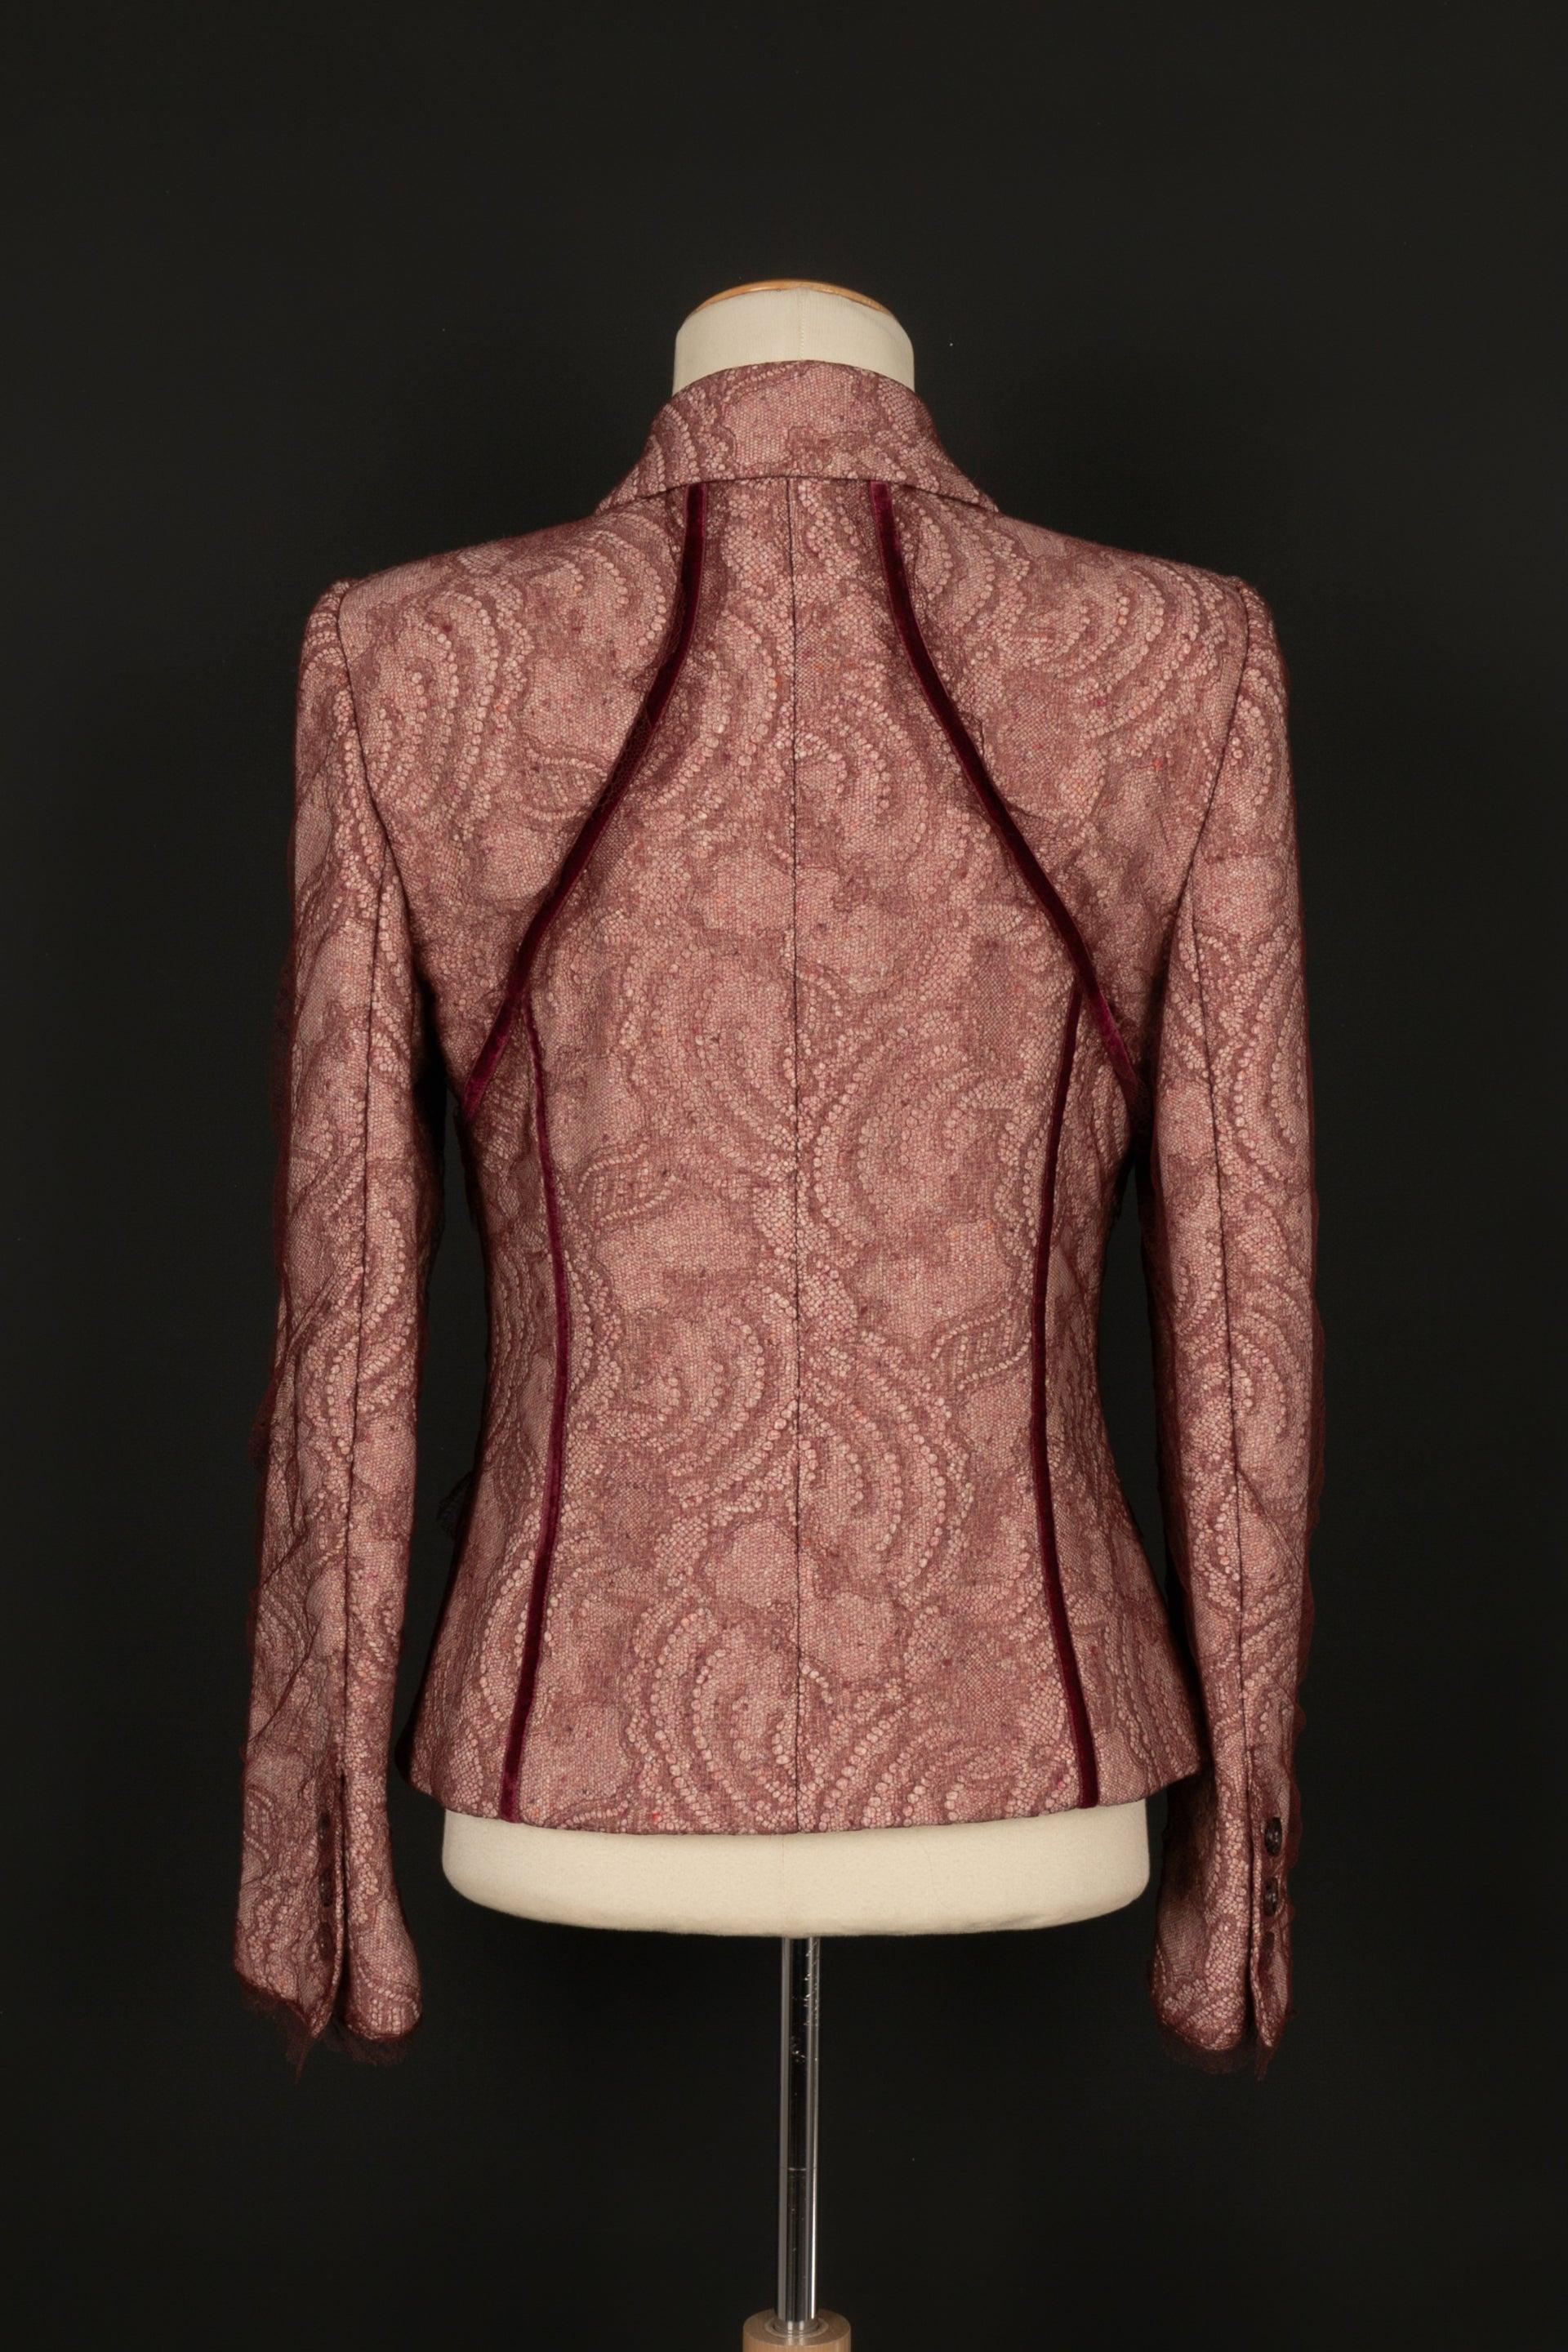 Brown Christian Lacroix Lace Jacket in Pink Tones with Printed Cotton Lining, 2000s For Sale